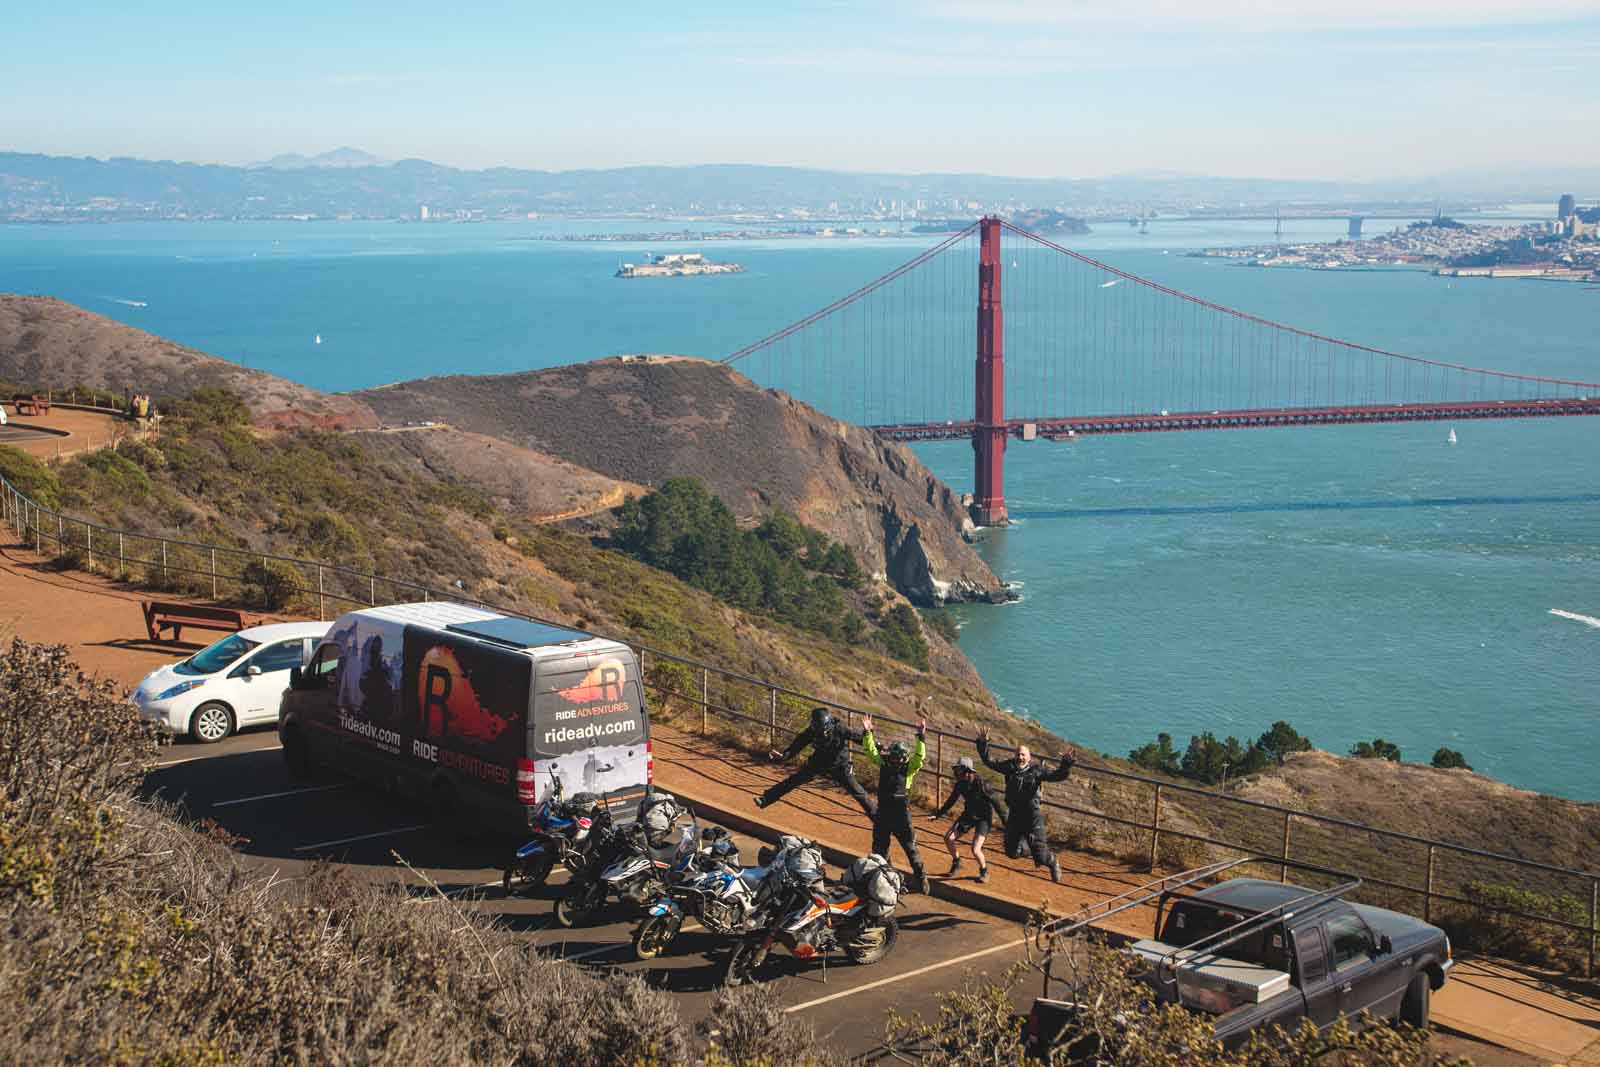 posing-in-front-of-the-golden-gate-bridge-on-the-pacific-coast-highway-offroad-adventure-motorcycle-tour-1